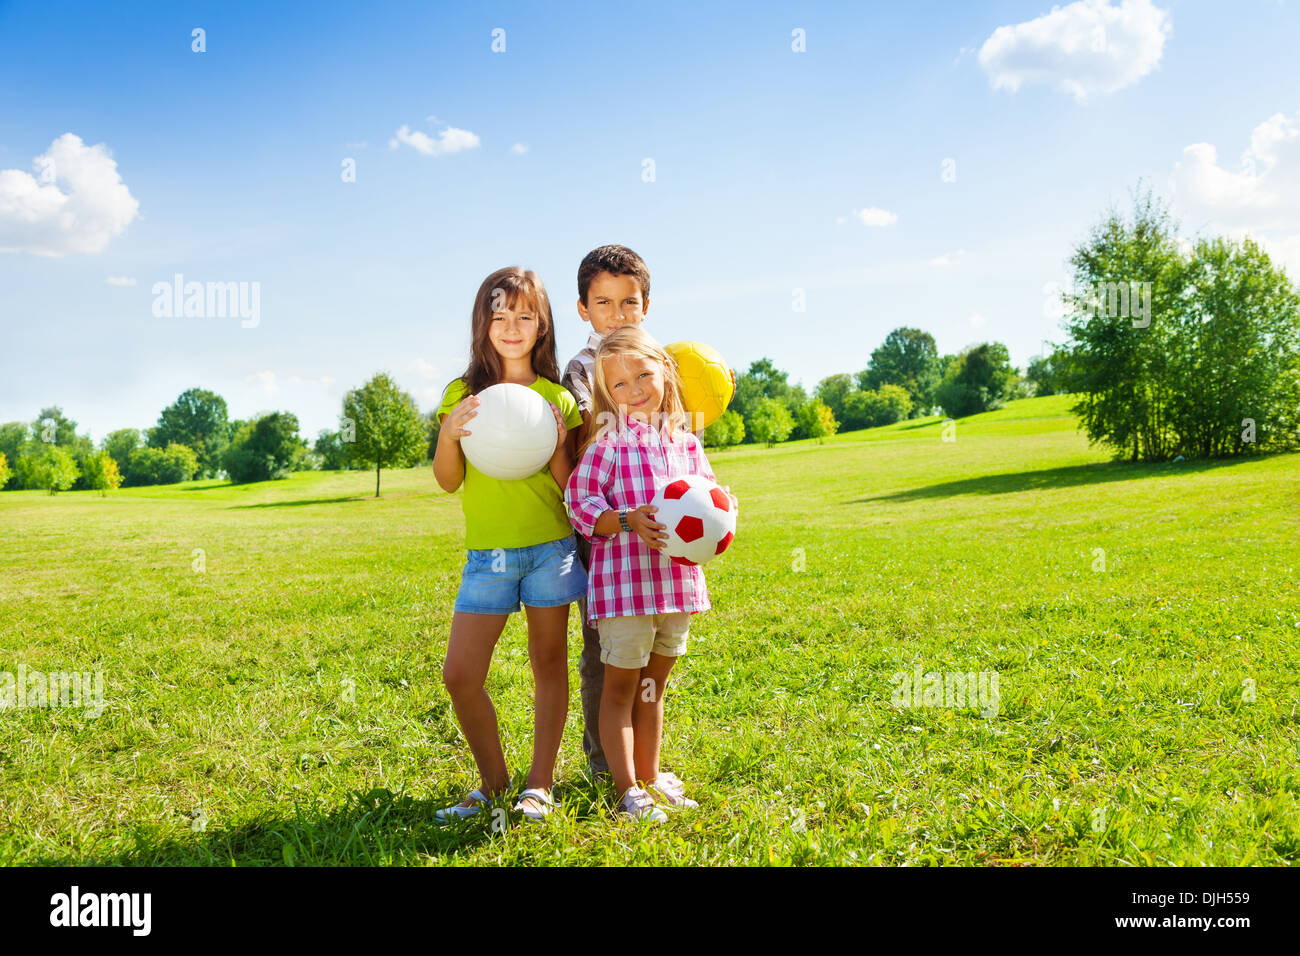 Three happy kids, boy and girls standing in the sunny summer park holding sport balls Stock Photo